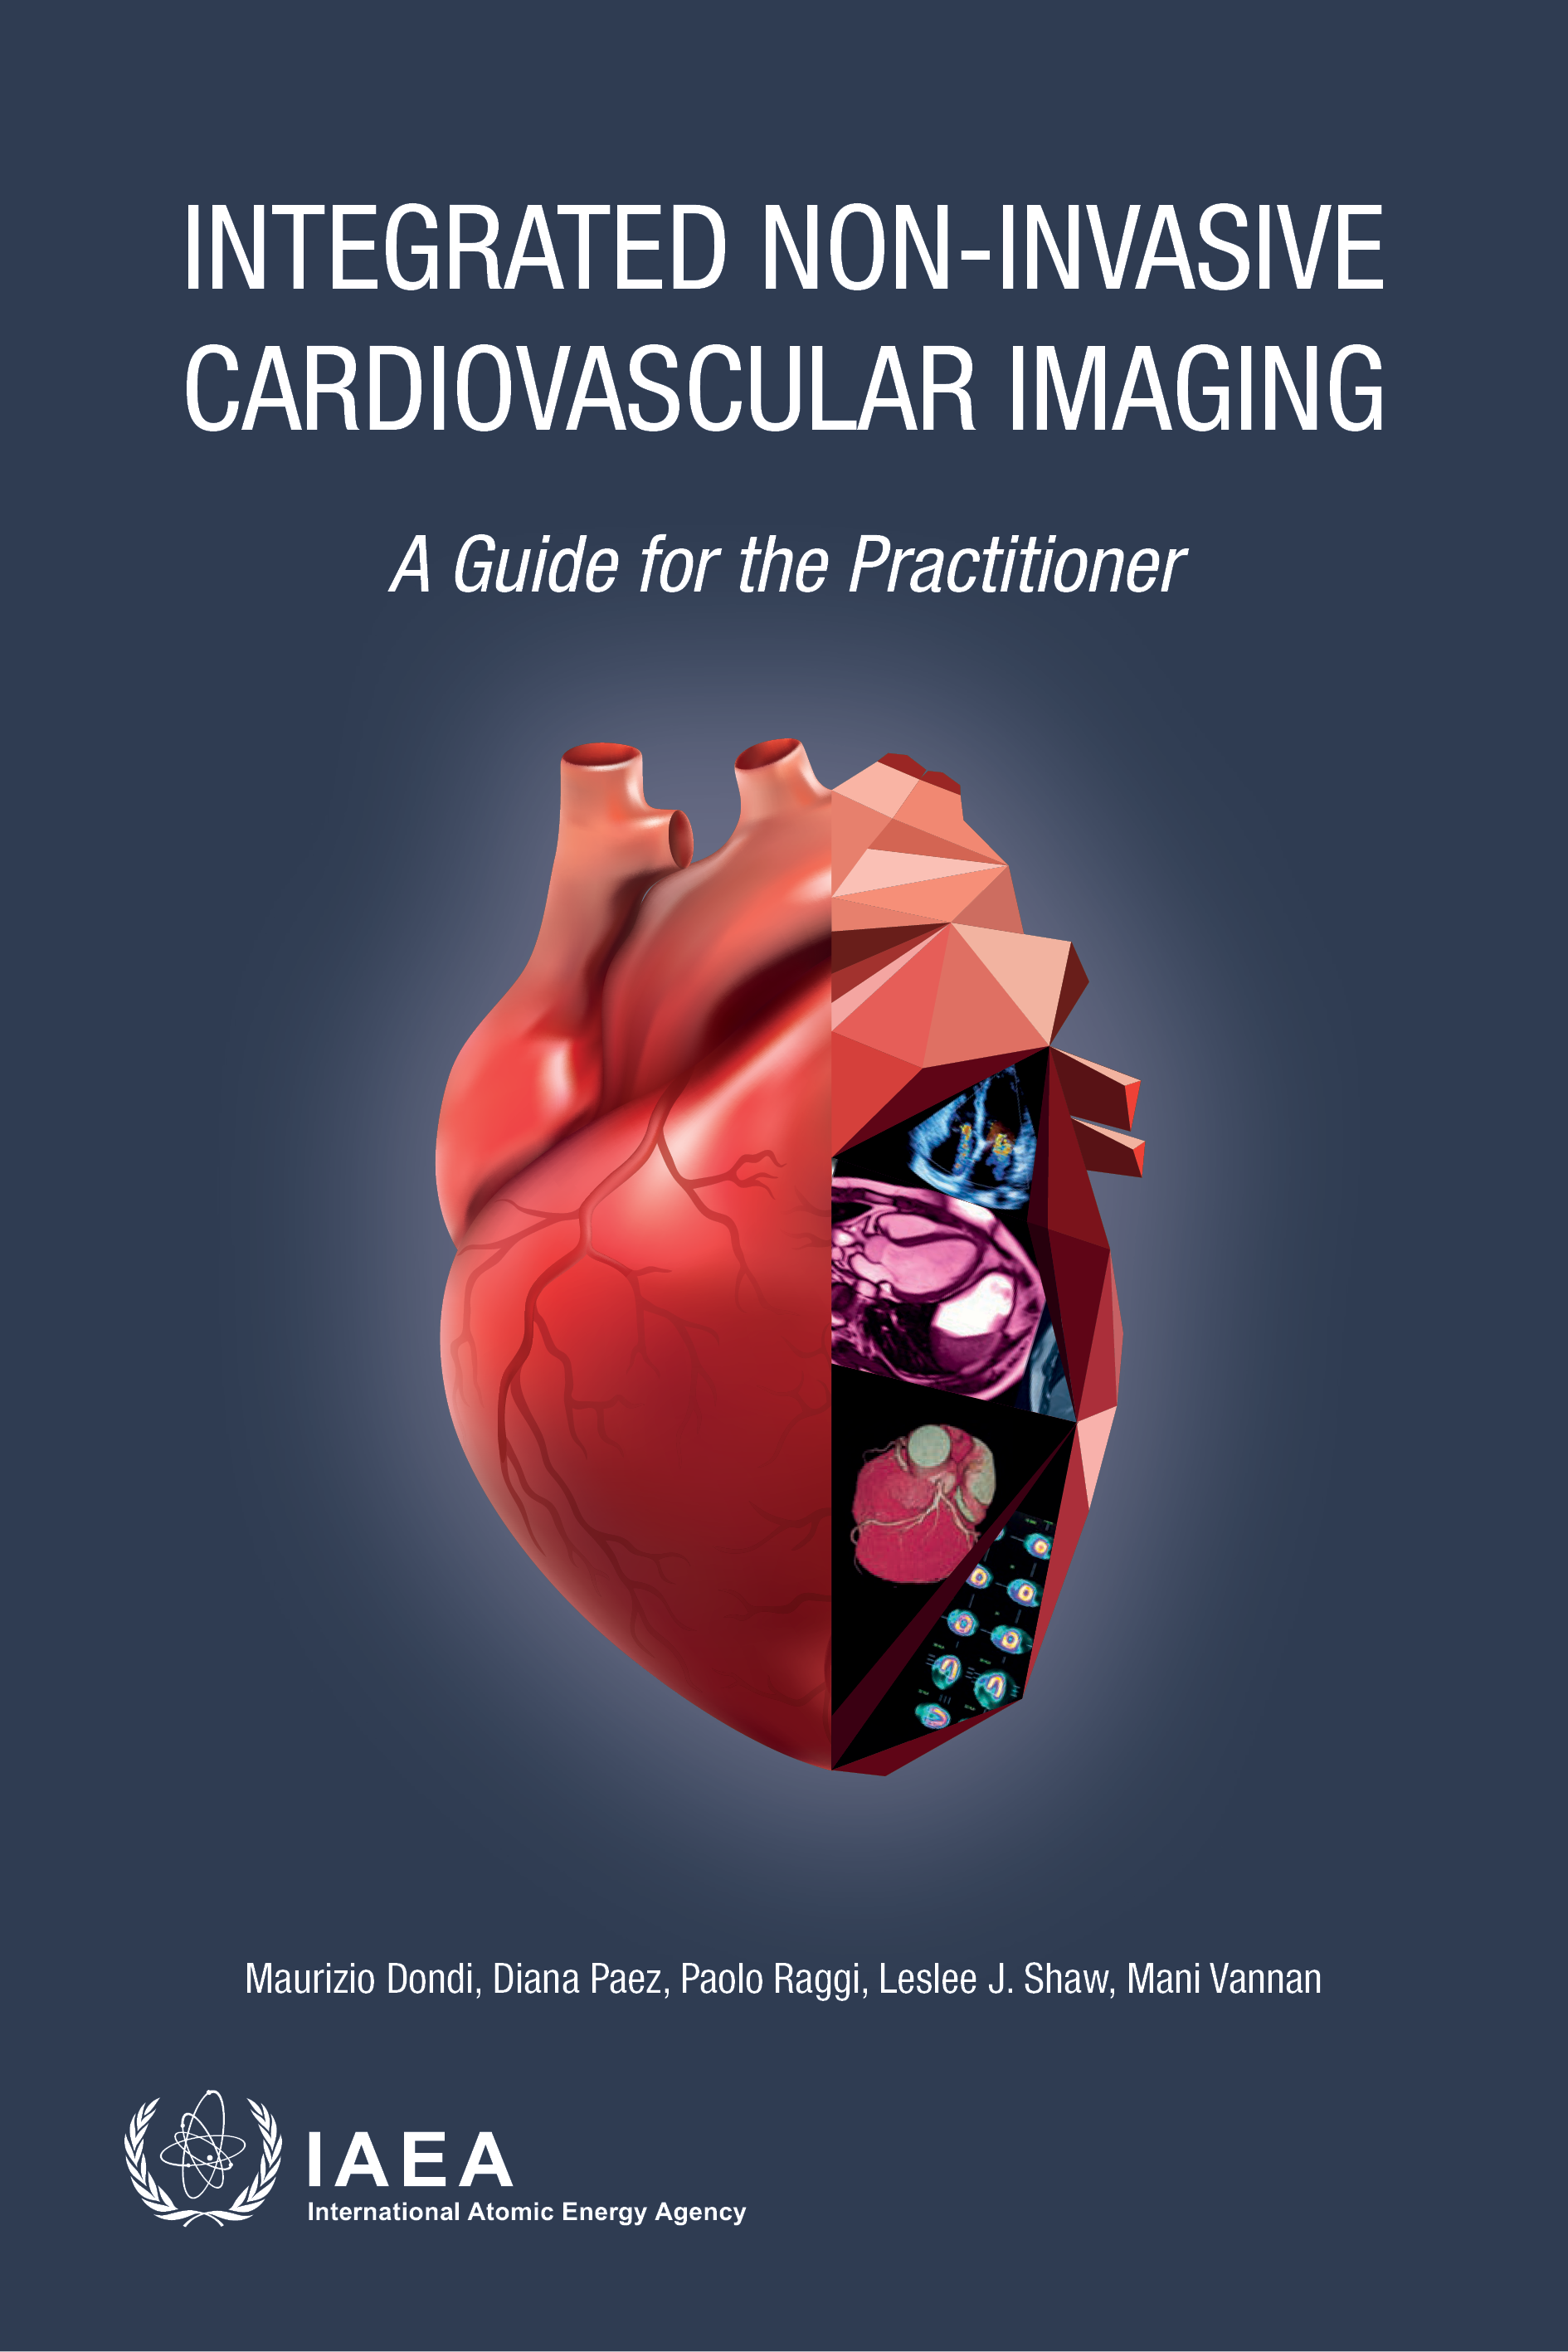 INTEGRATED NON-INVASIVE CARDIOVASCULAR IMAGING A GUIDE FOR THE PRACTITIONER - photo 1